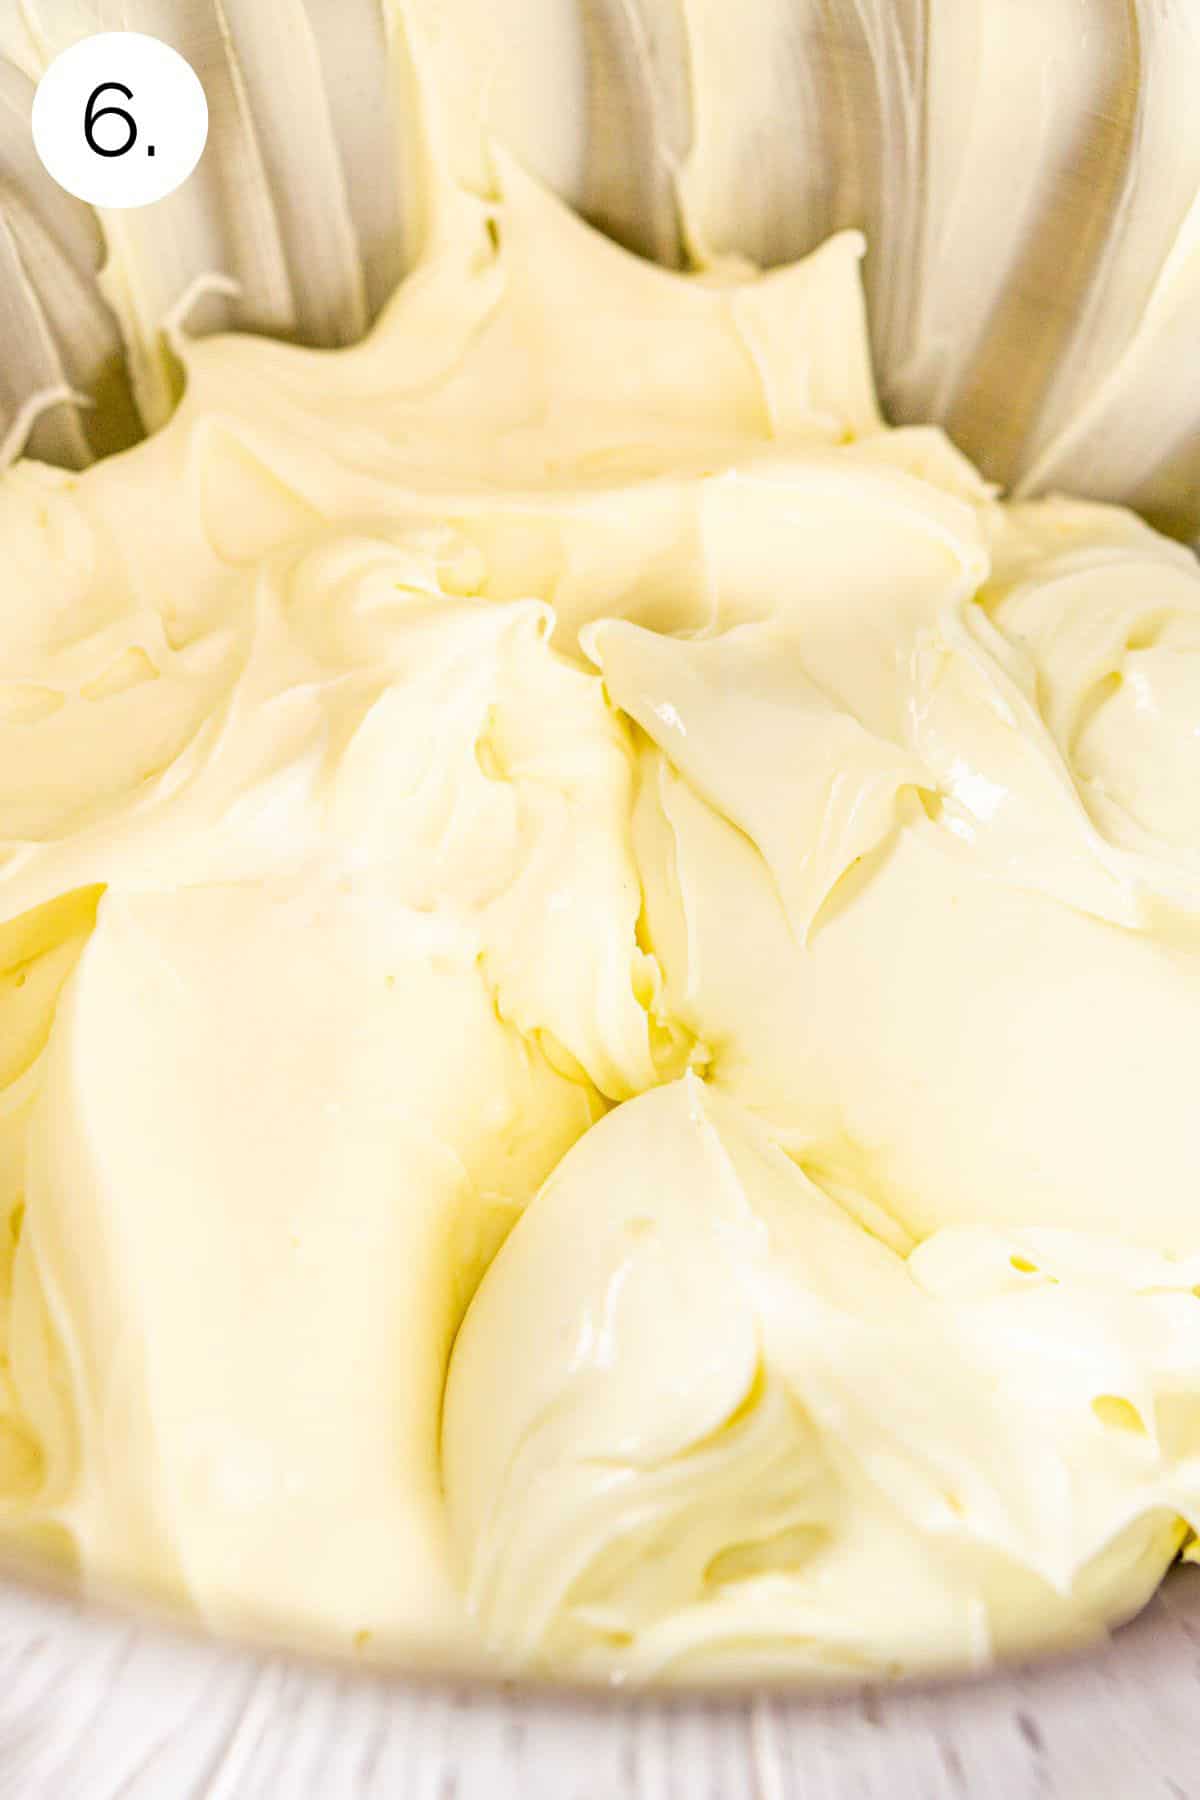 The cream cheese mixture in a large mixing bowl after the sour cream, vanilla and salt have been incorporated.